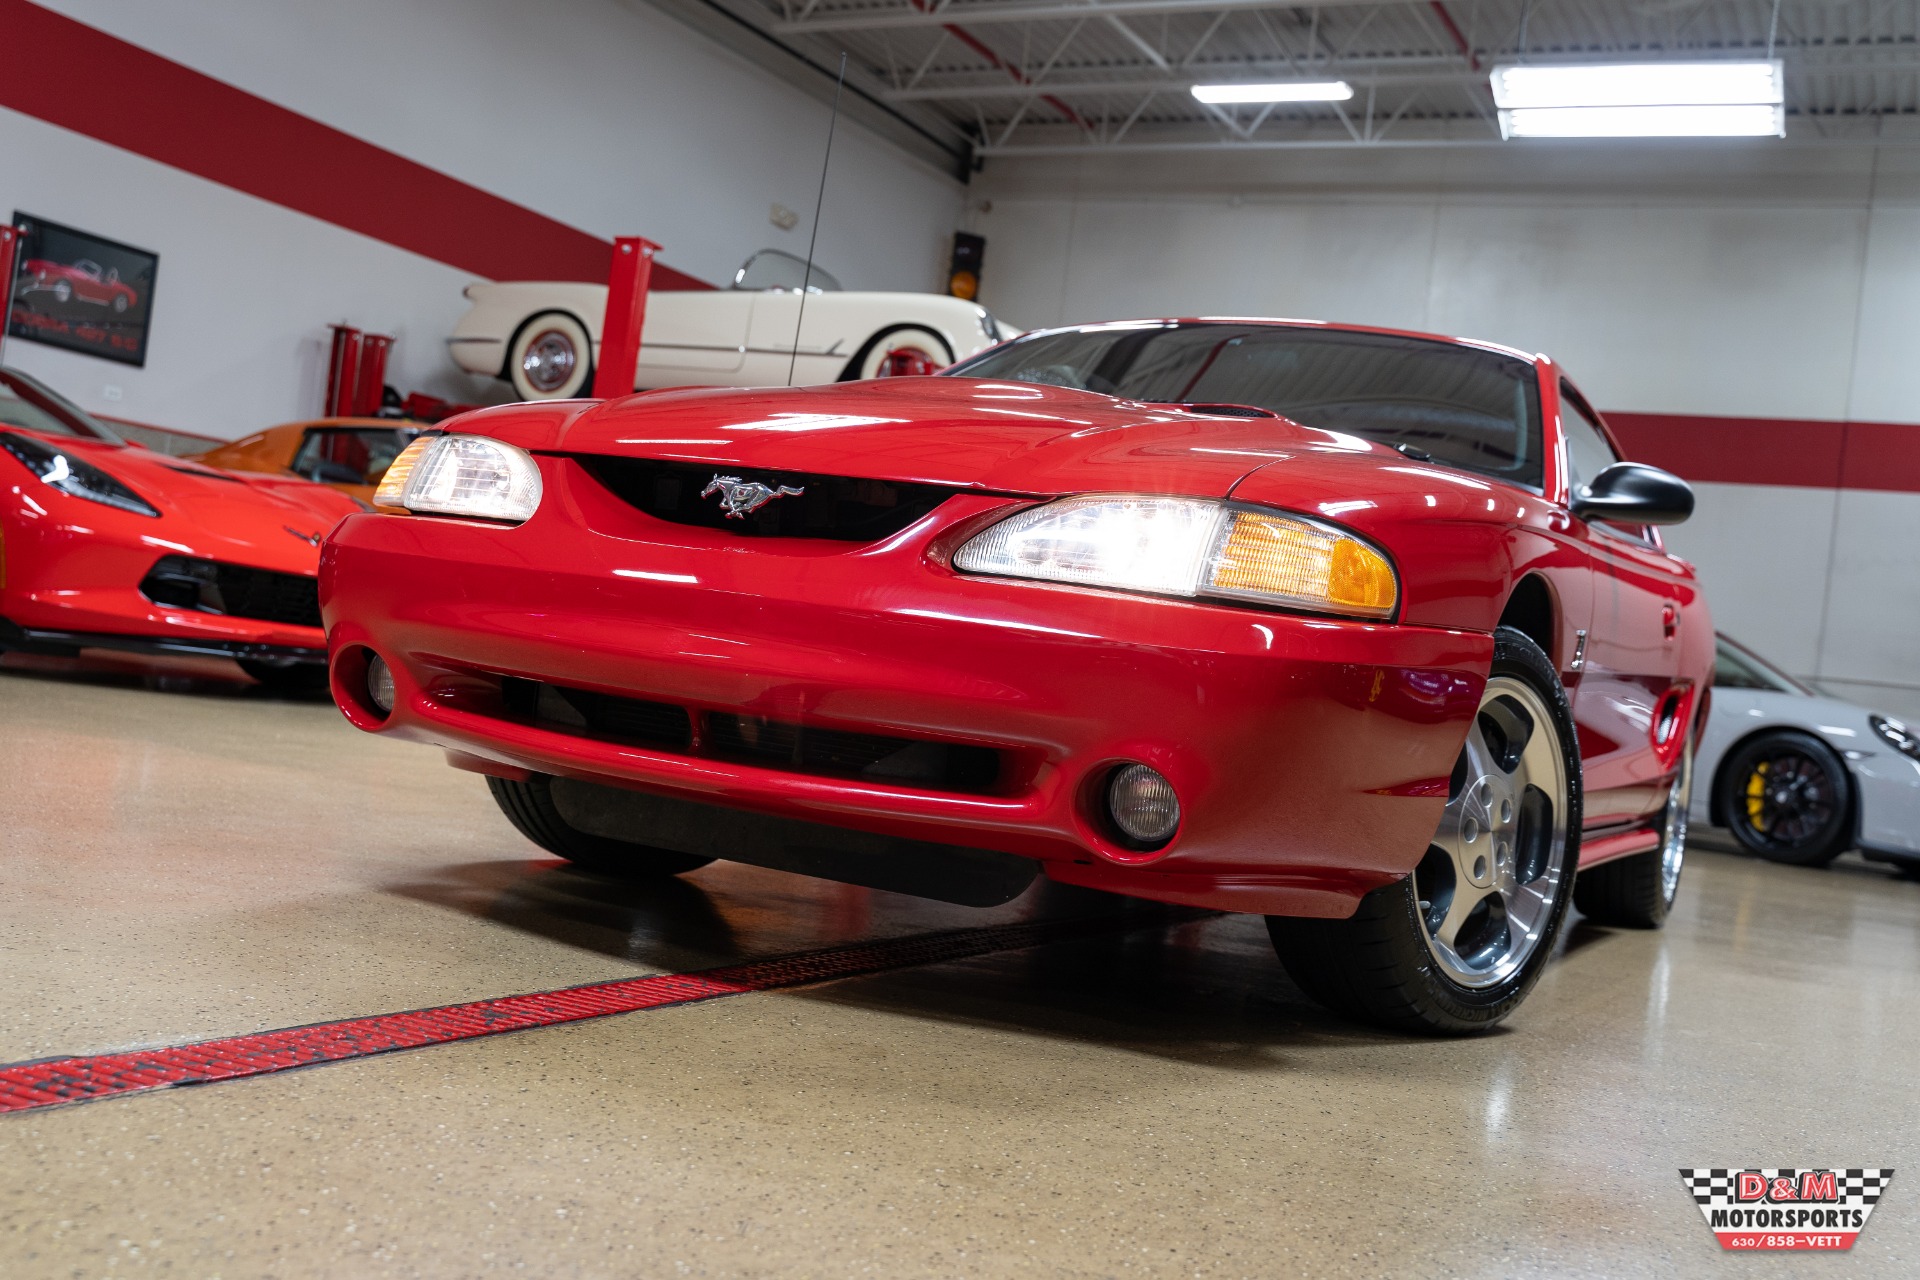 Rio Red 1997 Ford Mustang